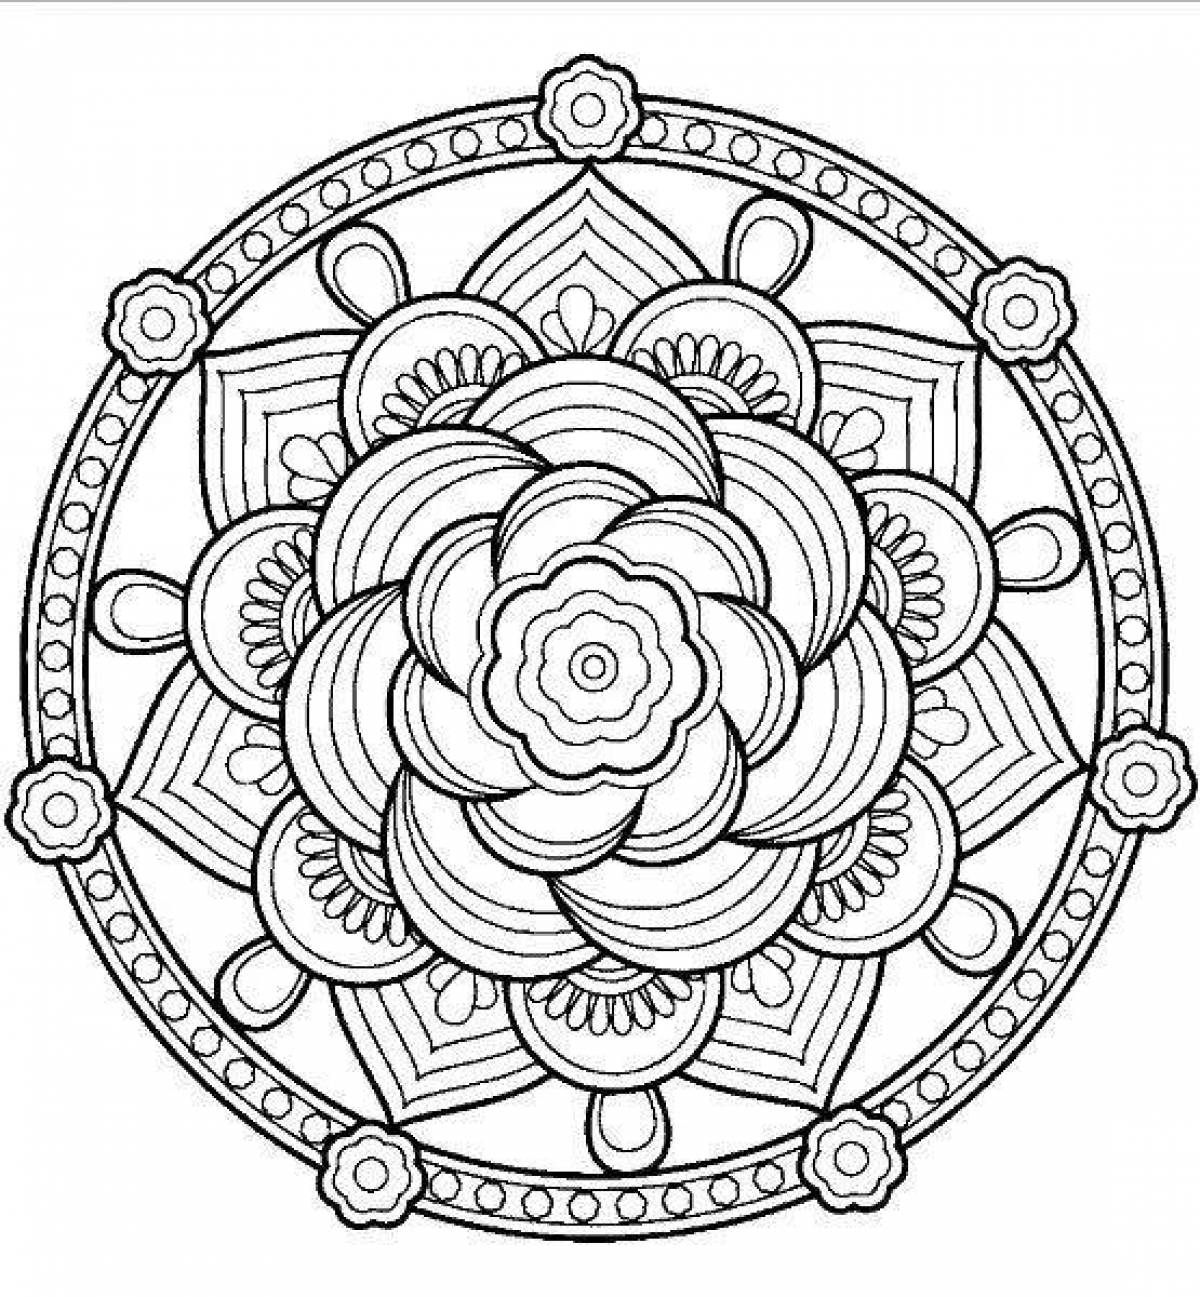 Fun mantra coloring pages